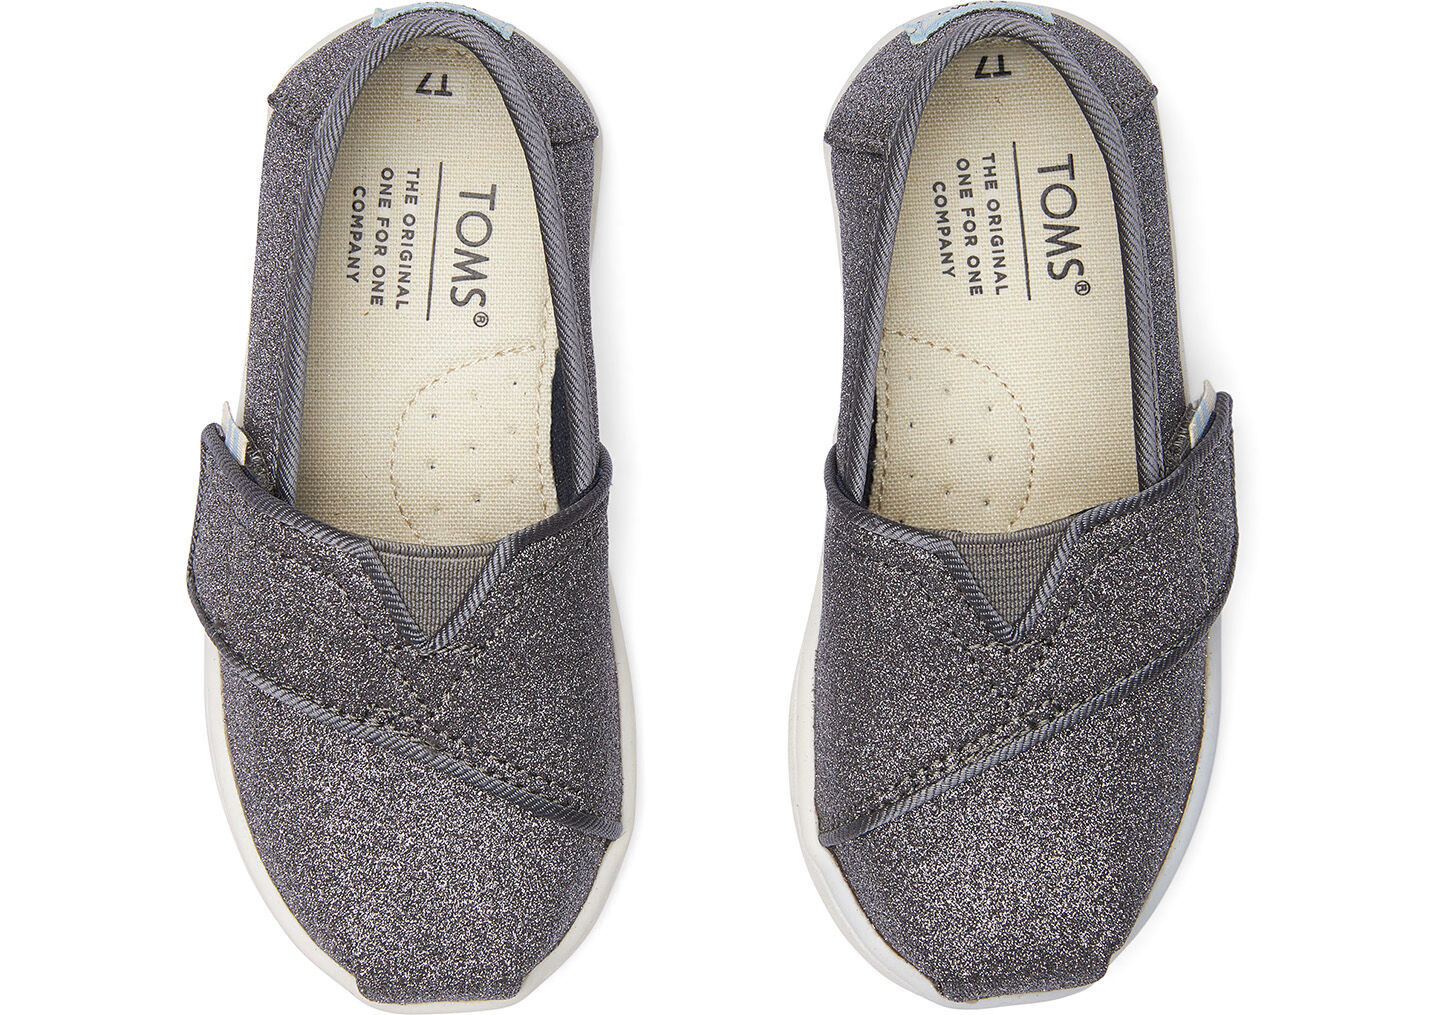 toms pewter party glitter